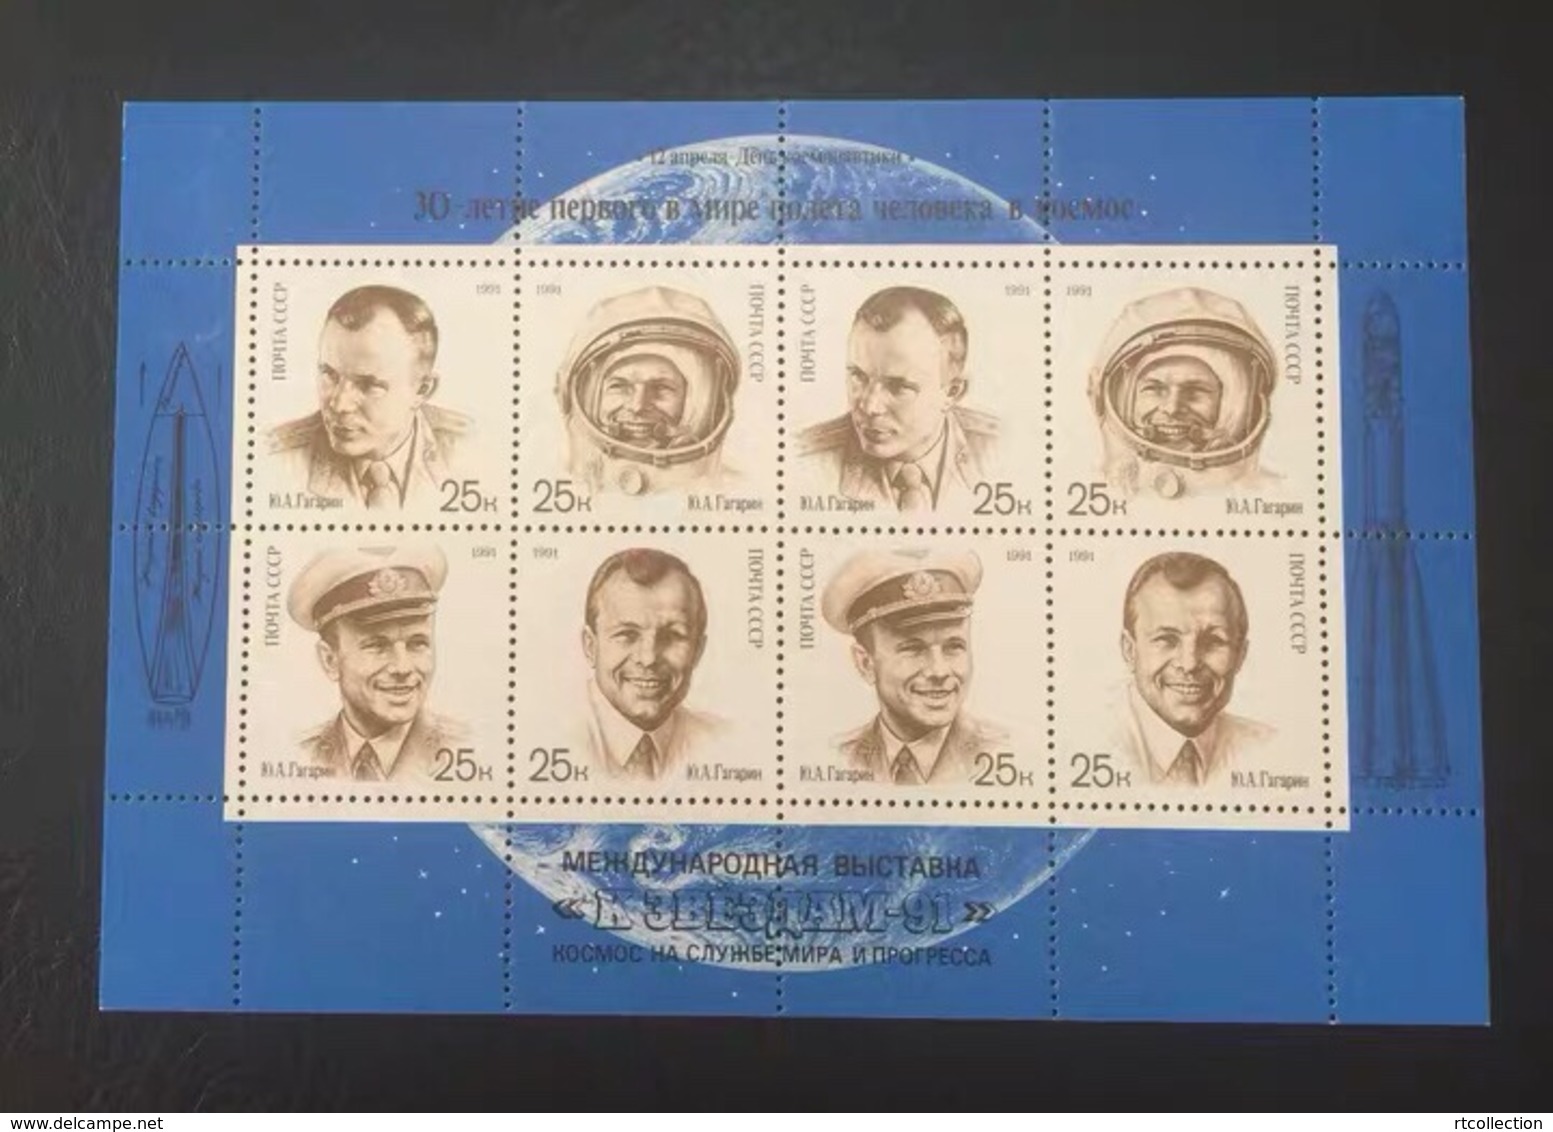 USSR Russia 1991 M/S 30th Anniv First Man In Space Cosmonautics Day Yuri Gagarin Explore Spacemen People Stamps MNH - Collections